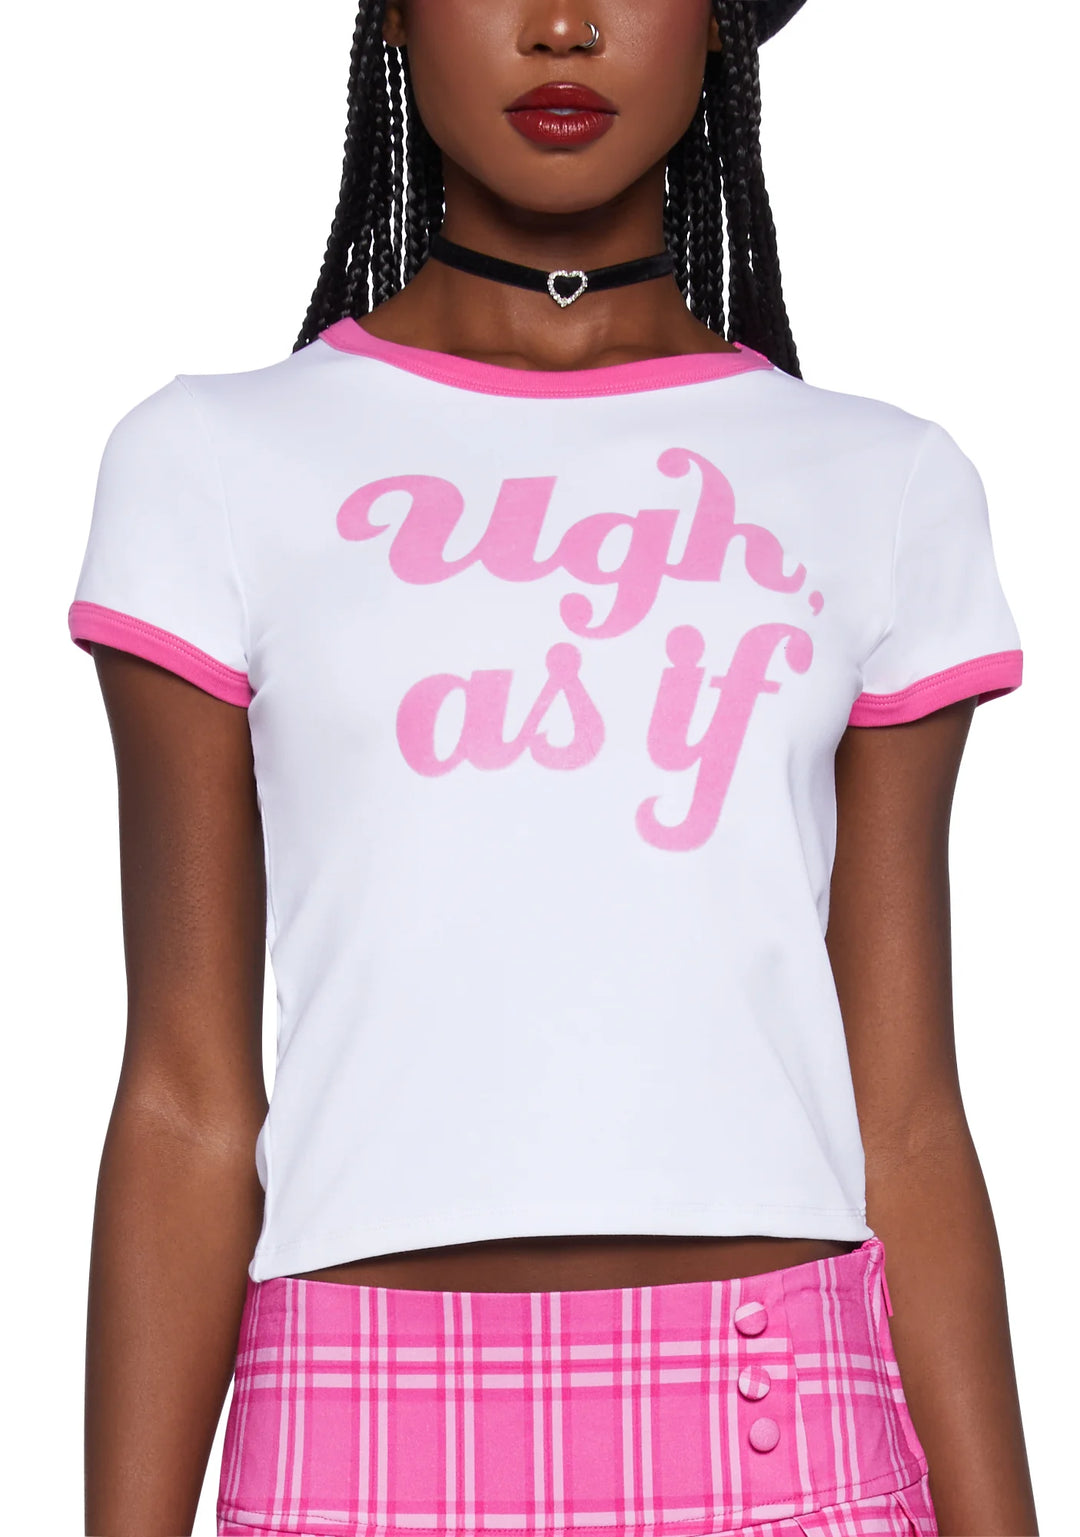 Ugh As If…Clueless Tee (as worn by Lizzo)